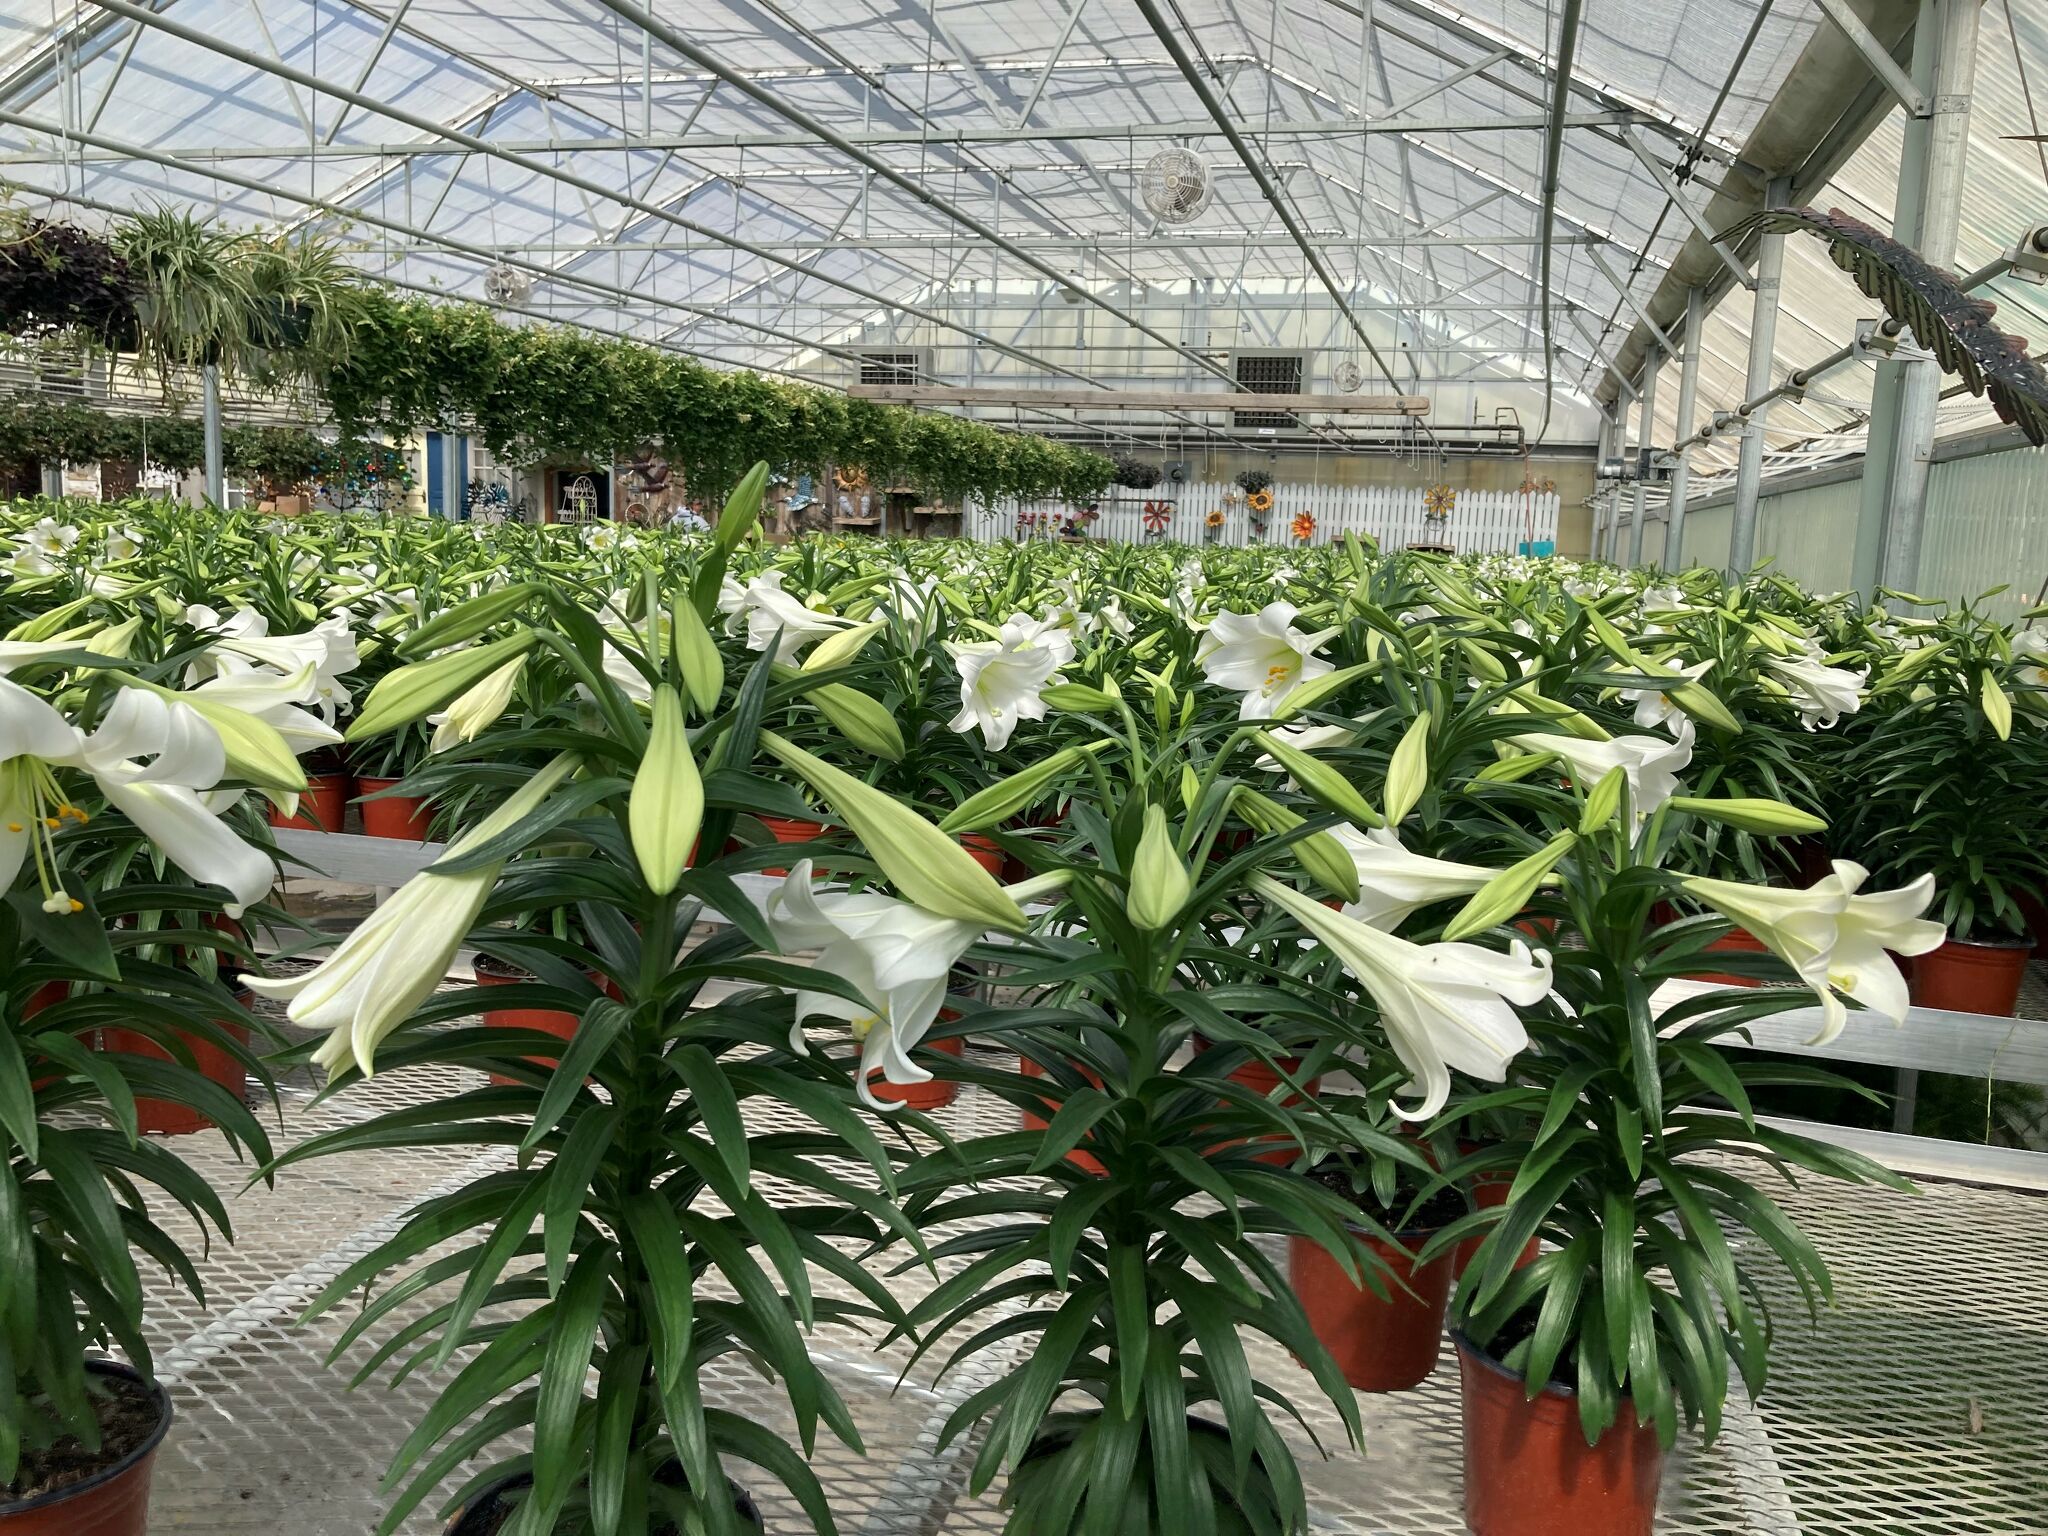 Celebrating one of the sights and smells of the season: Behold the Easter Lilly